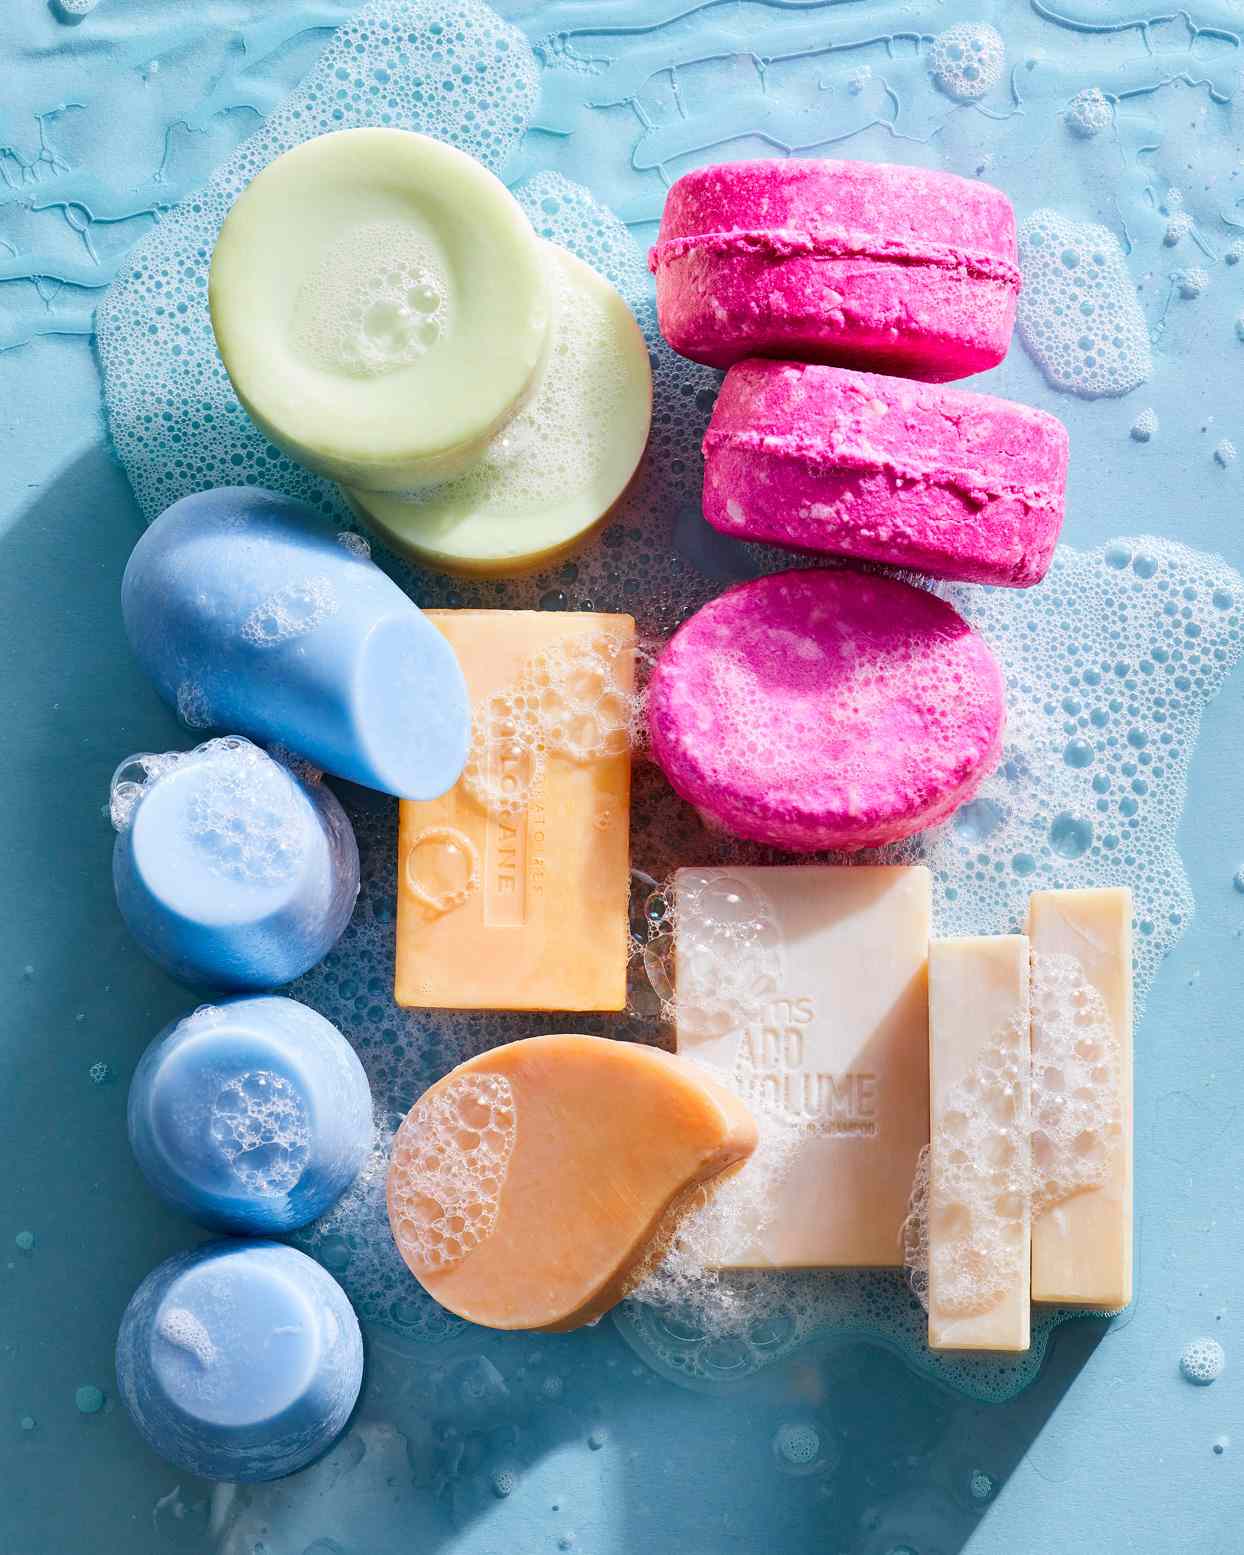 Solid shampoo and conditioner bars